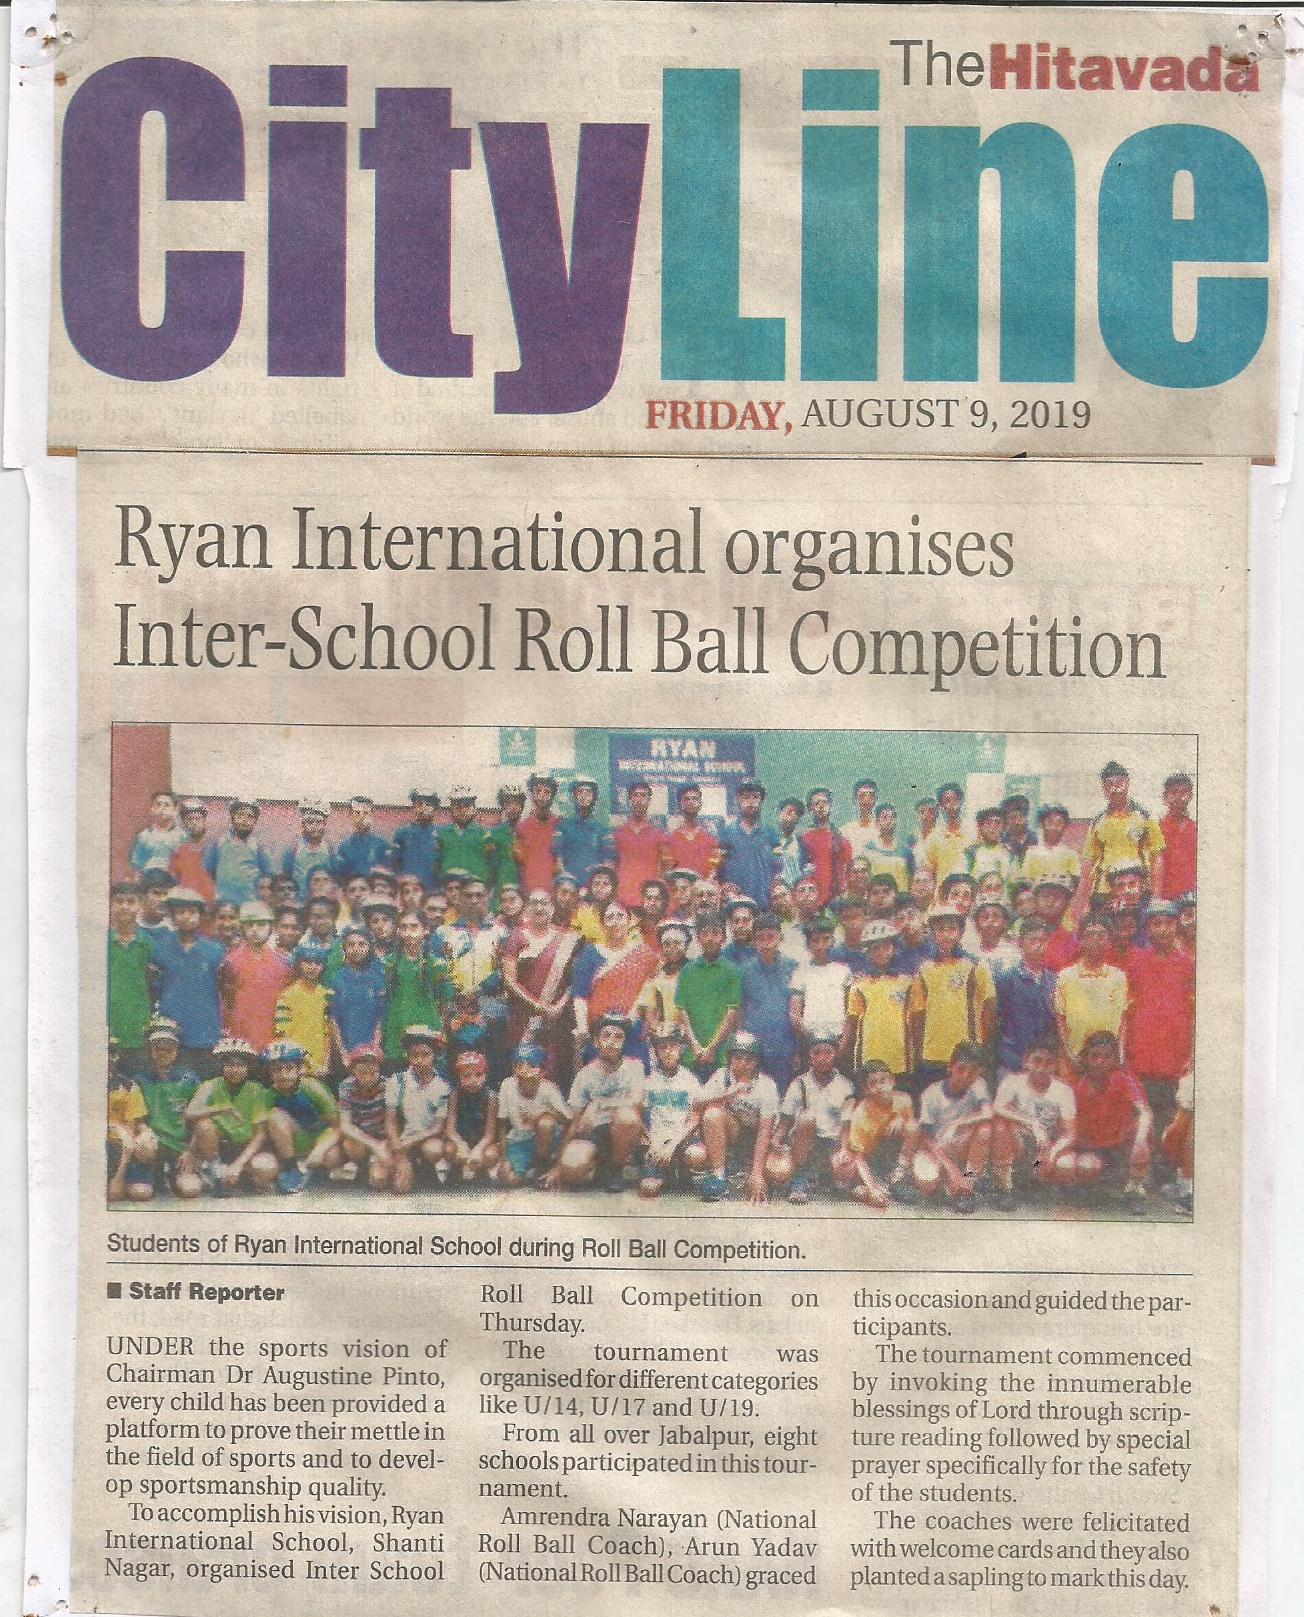 Inter-School Roll Ball Competition